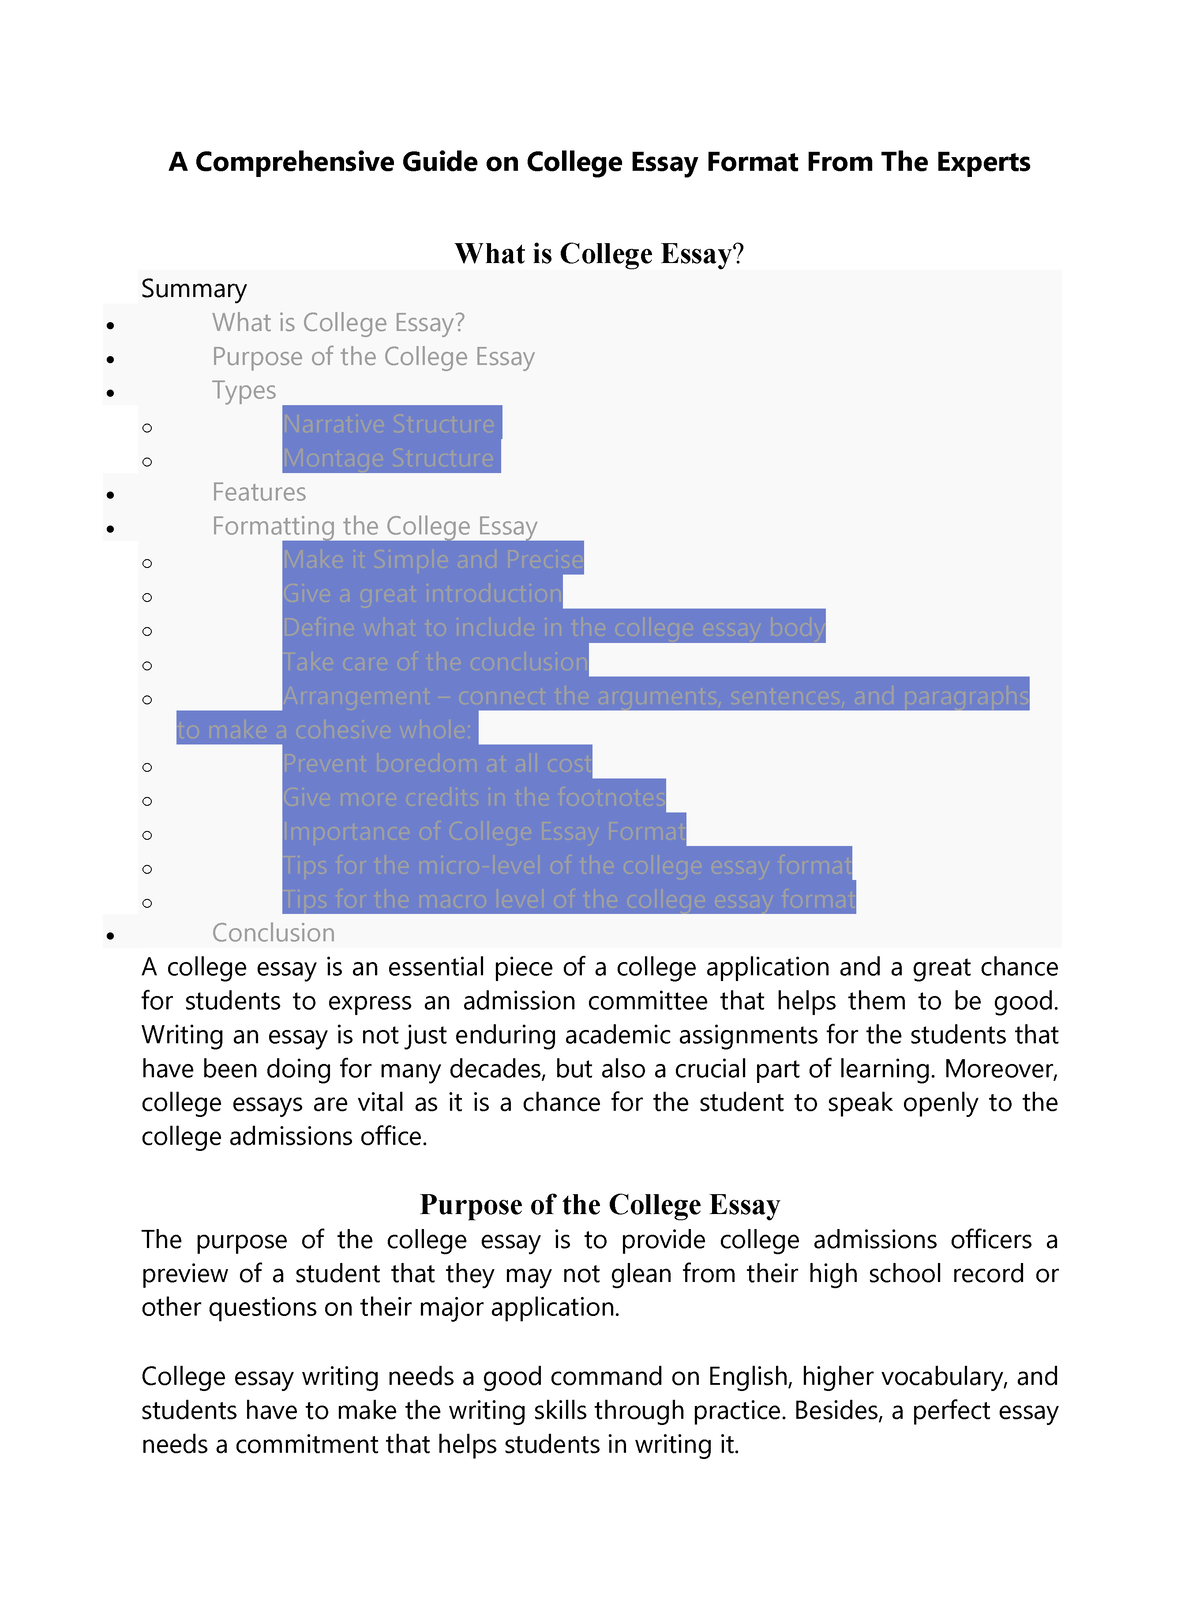 what should you include in a college essay